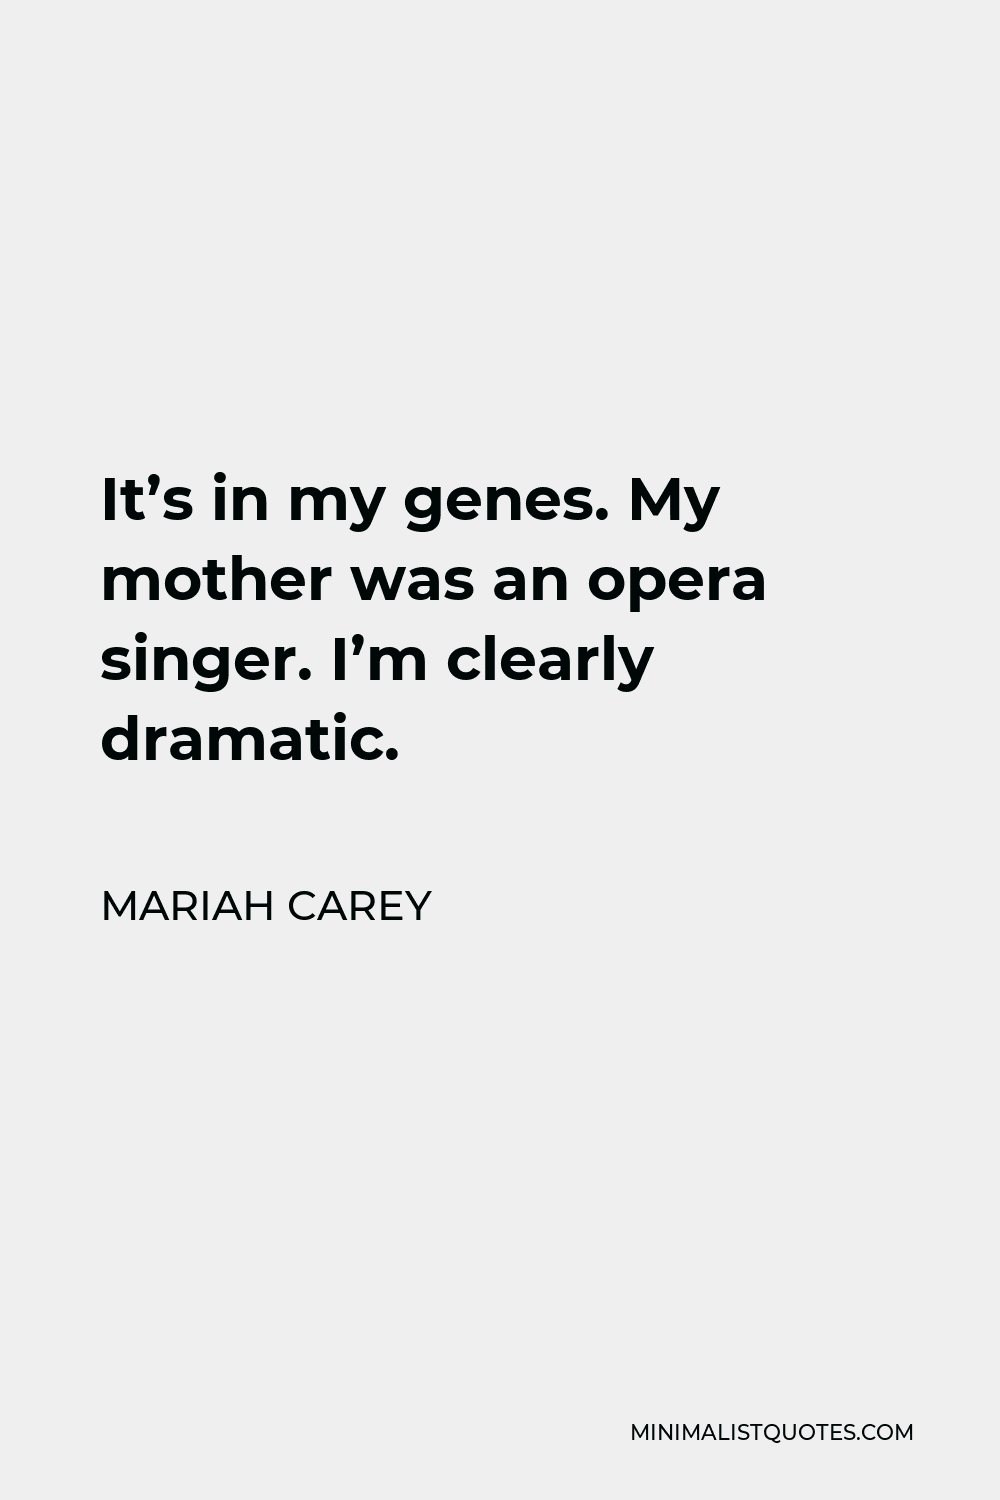 Mariah Carey Quote - It’s in my genes. My mother was an opera singer. I’m clearly dramatic.